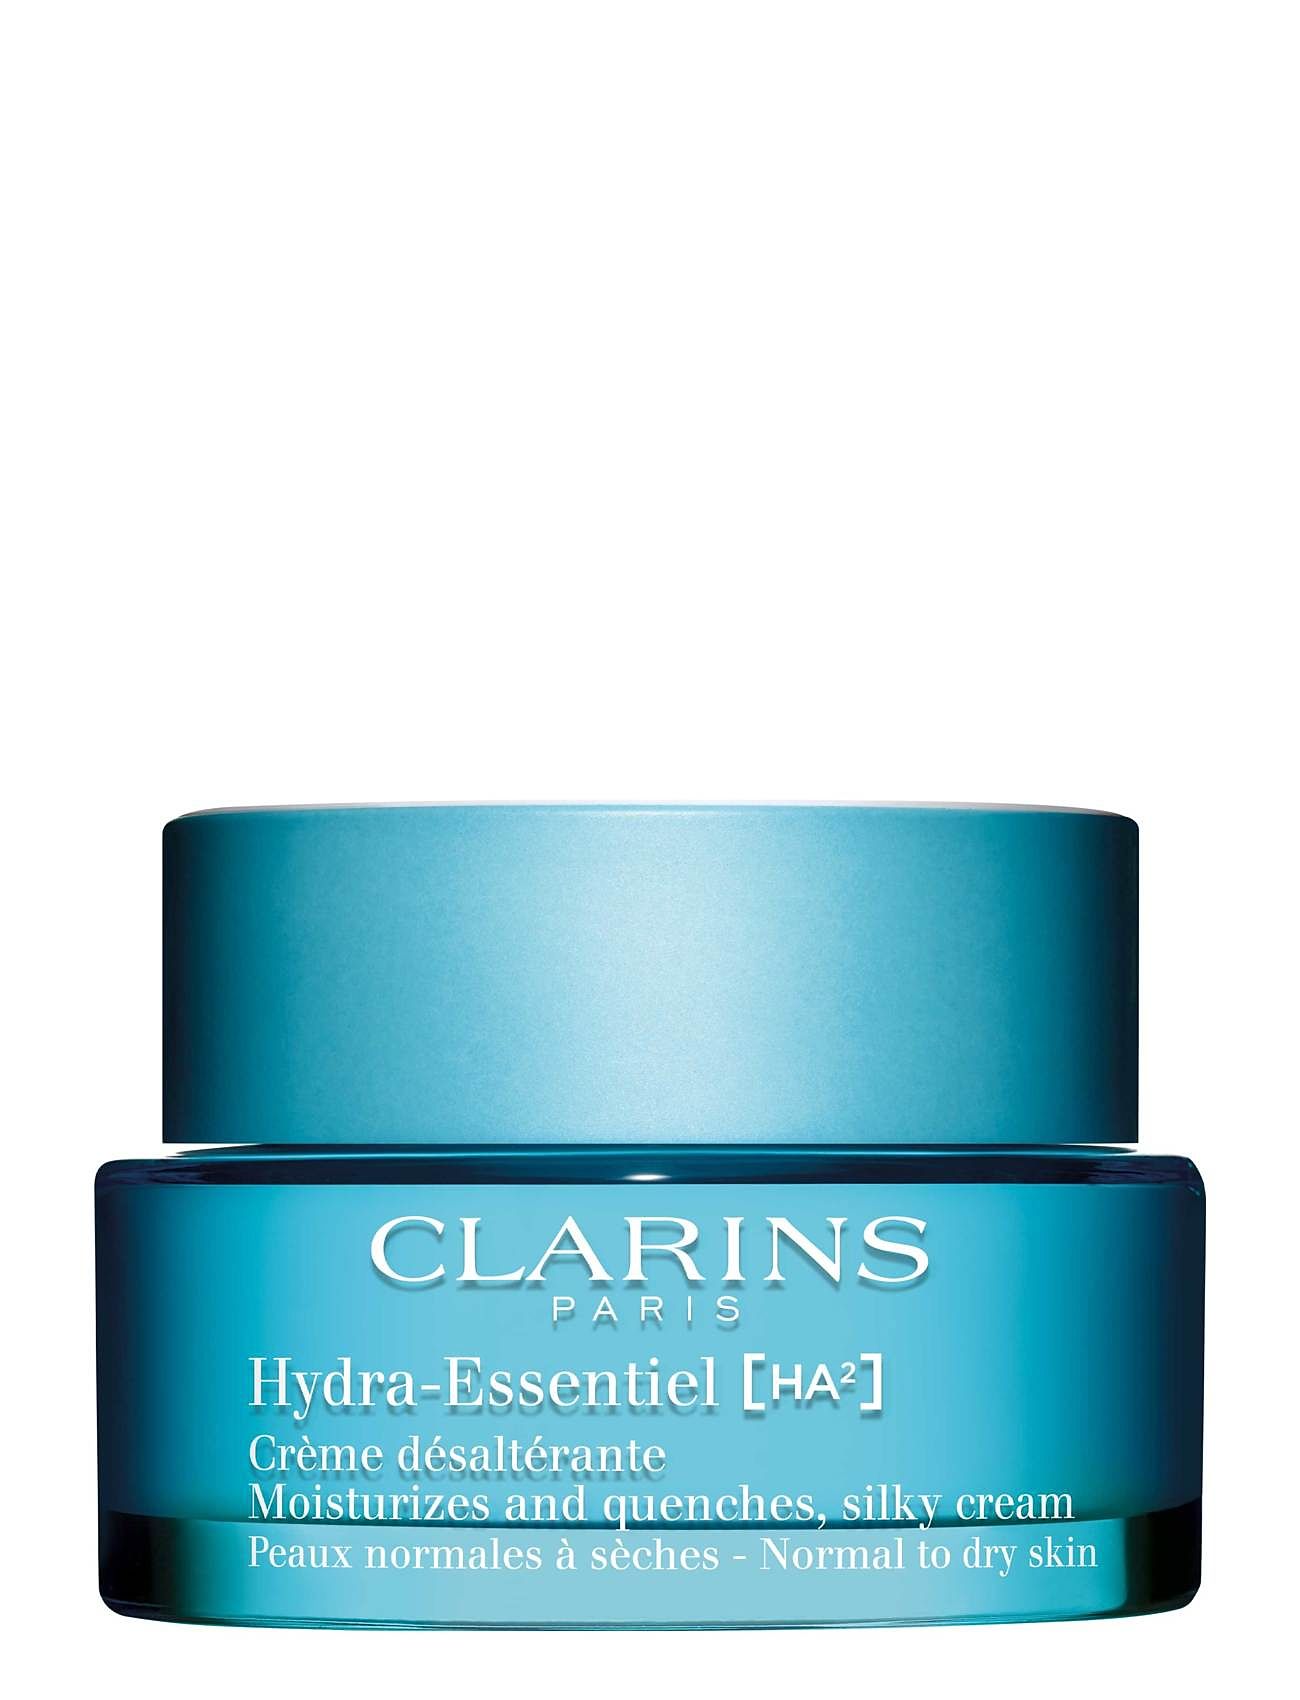 Hydra-Essentiel Moisturizes And Quenches, Silky Cream Normal To Dry Skin Beauty Women Skin Care Face Moisturizers Night Cream Nude Clarins